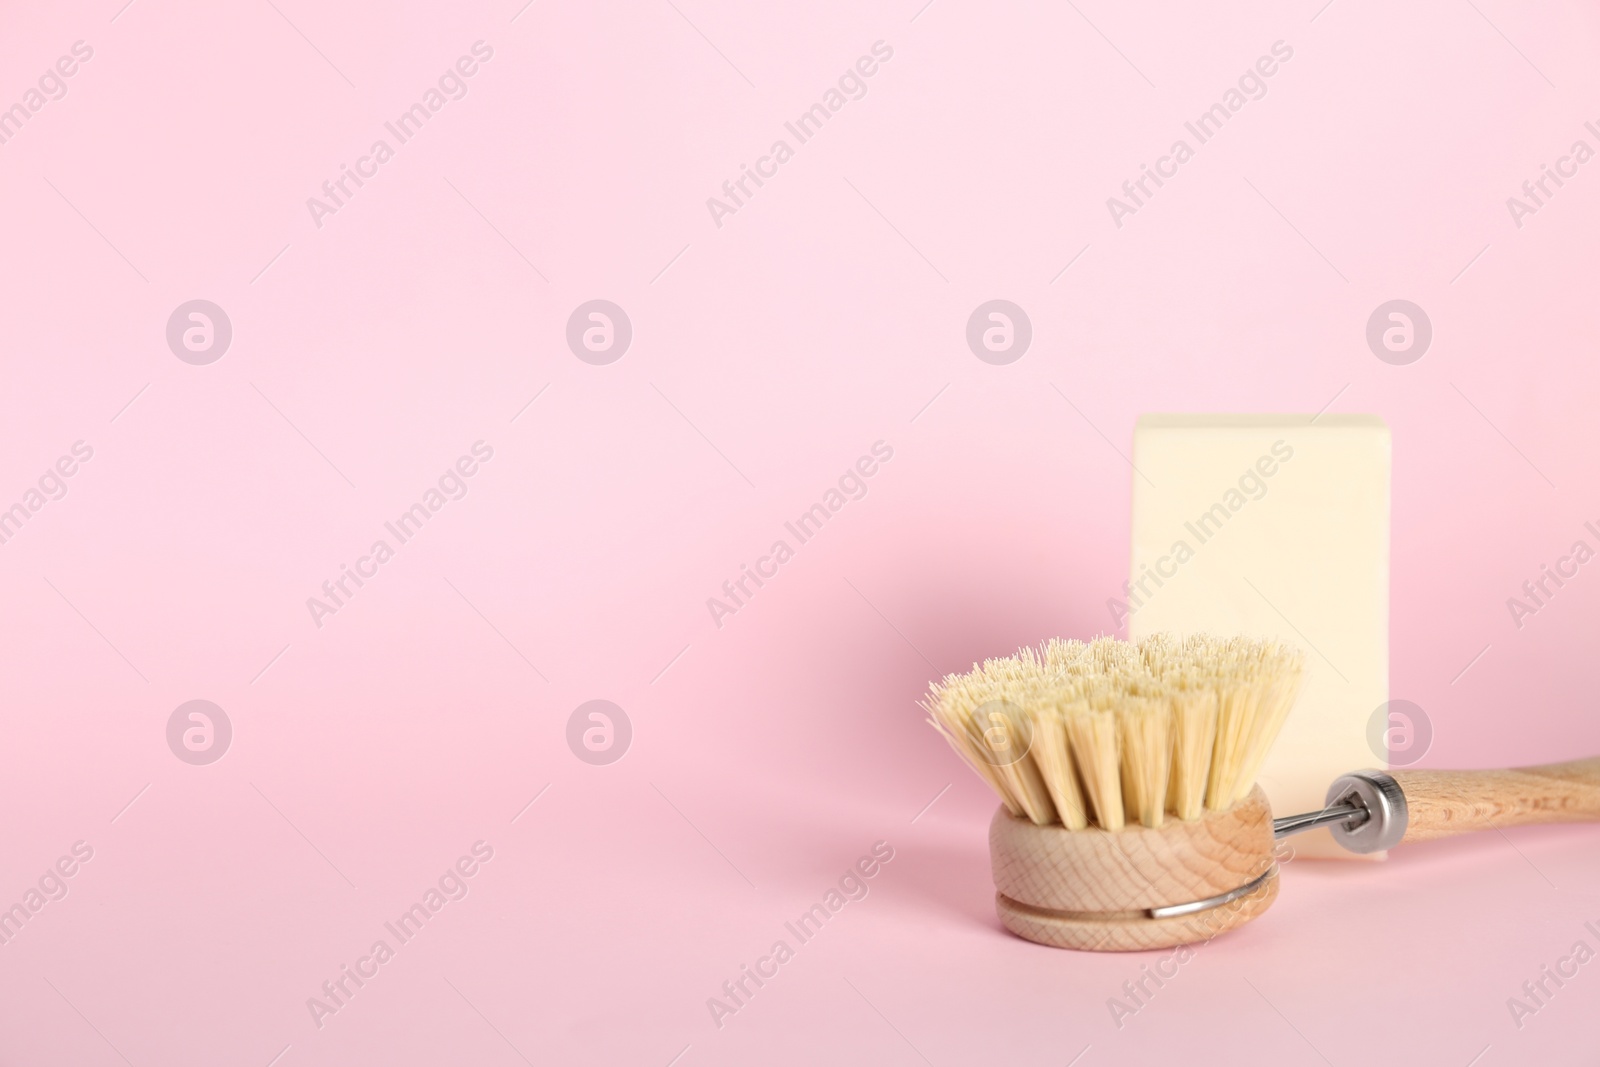 Photo of Cleaning brush and soap bar on pink background, space for text. Dish washing supplies